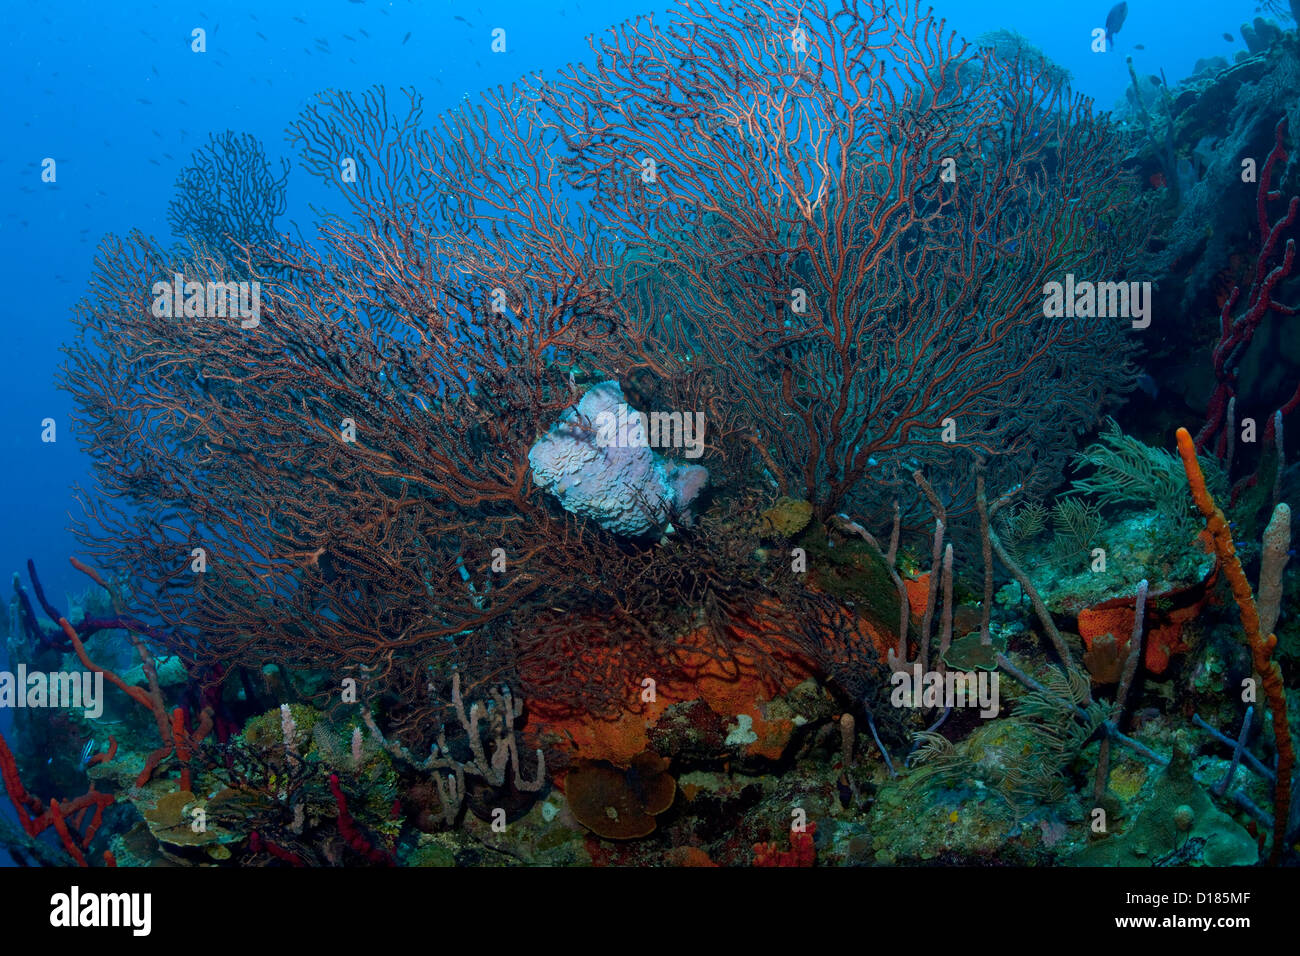 A large Gorgonian coral off the coast of the Swan Islands, Honduras. Stock Photo